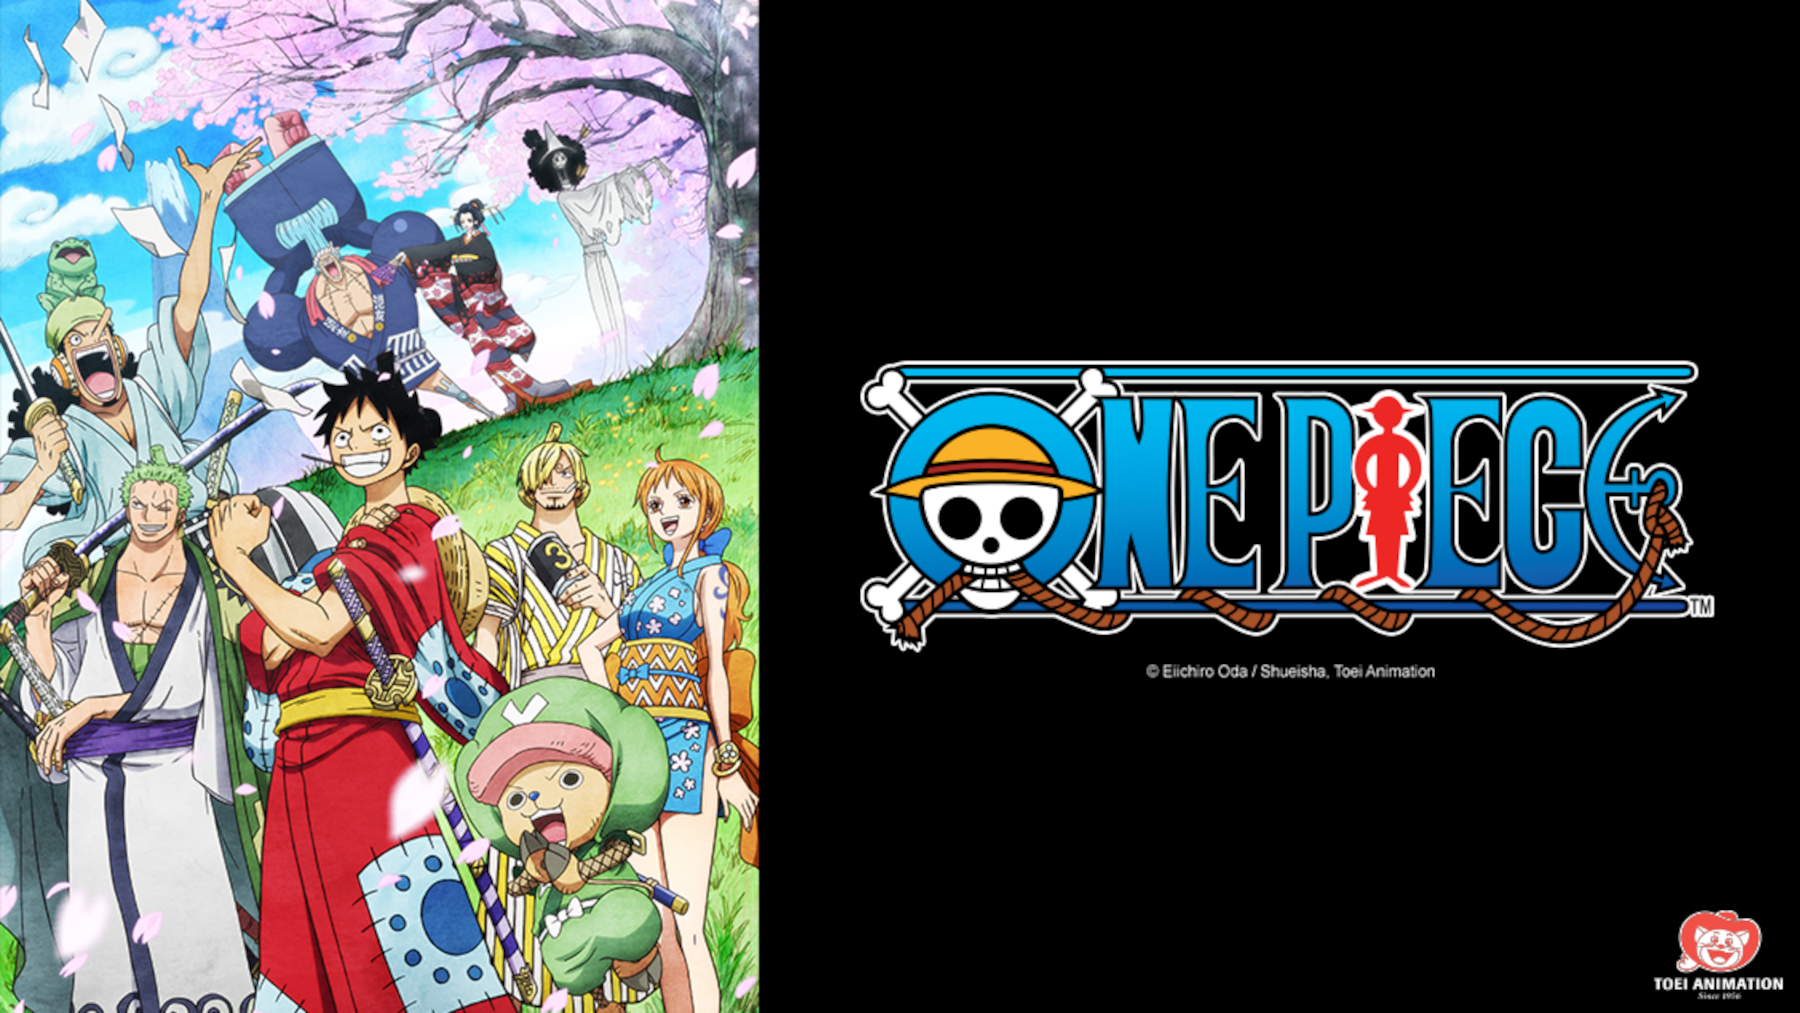 Key art for the 'One Piece' anime, which will bring more episodes to Netflix in July 2022. The image features Monkey D. Luffy and the Straw Hats on the left and the 'One Piece' logo on the right.